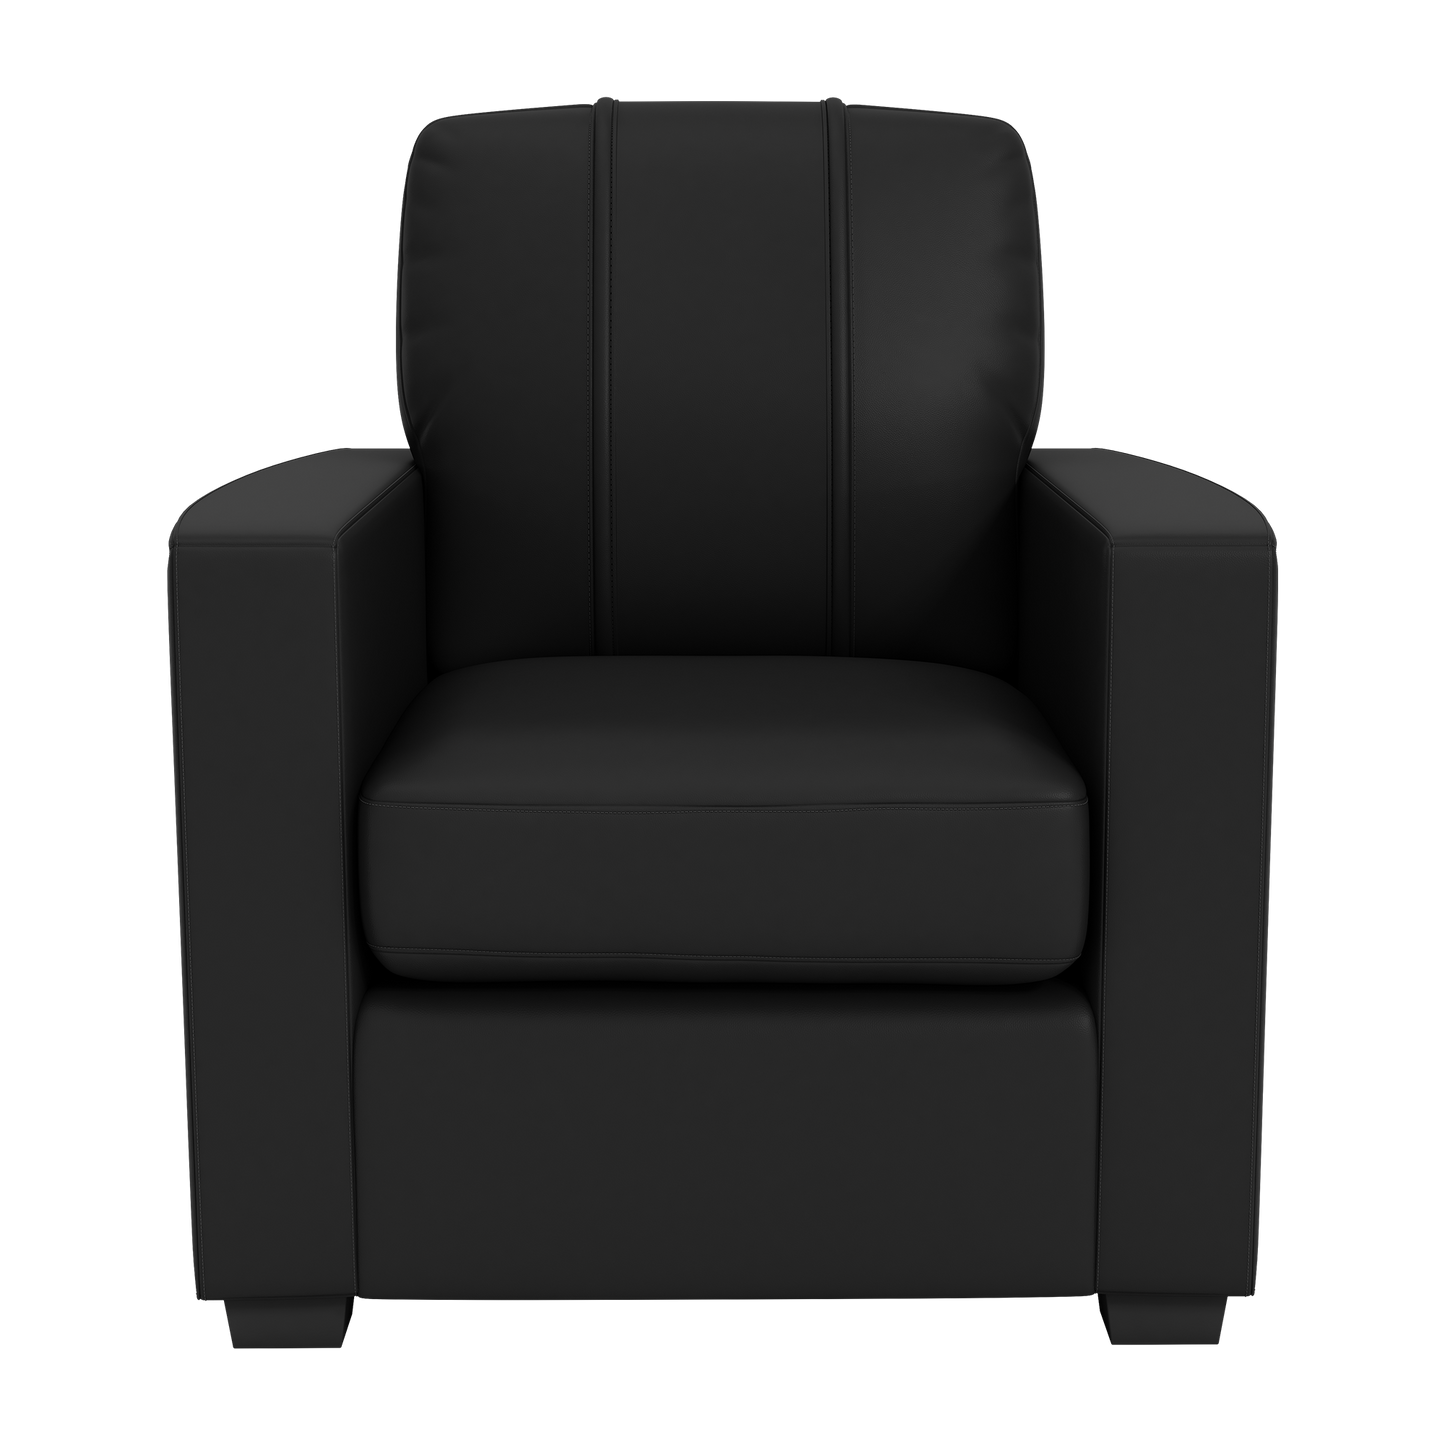 Silver Club Chair with Arizona Coyotes Secondary Logo